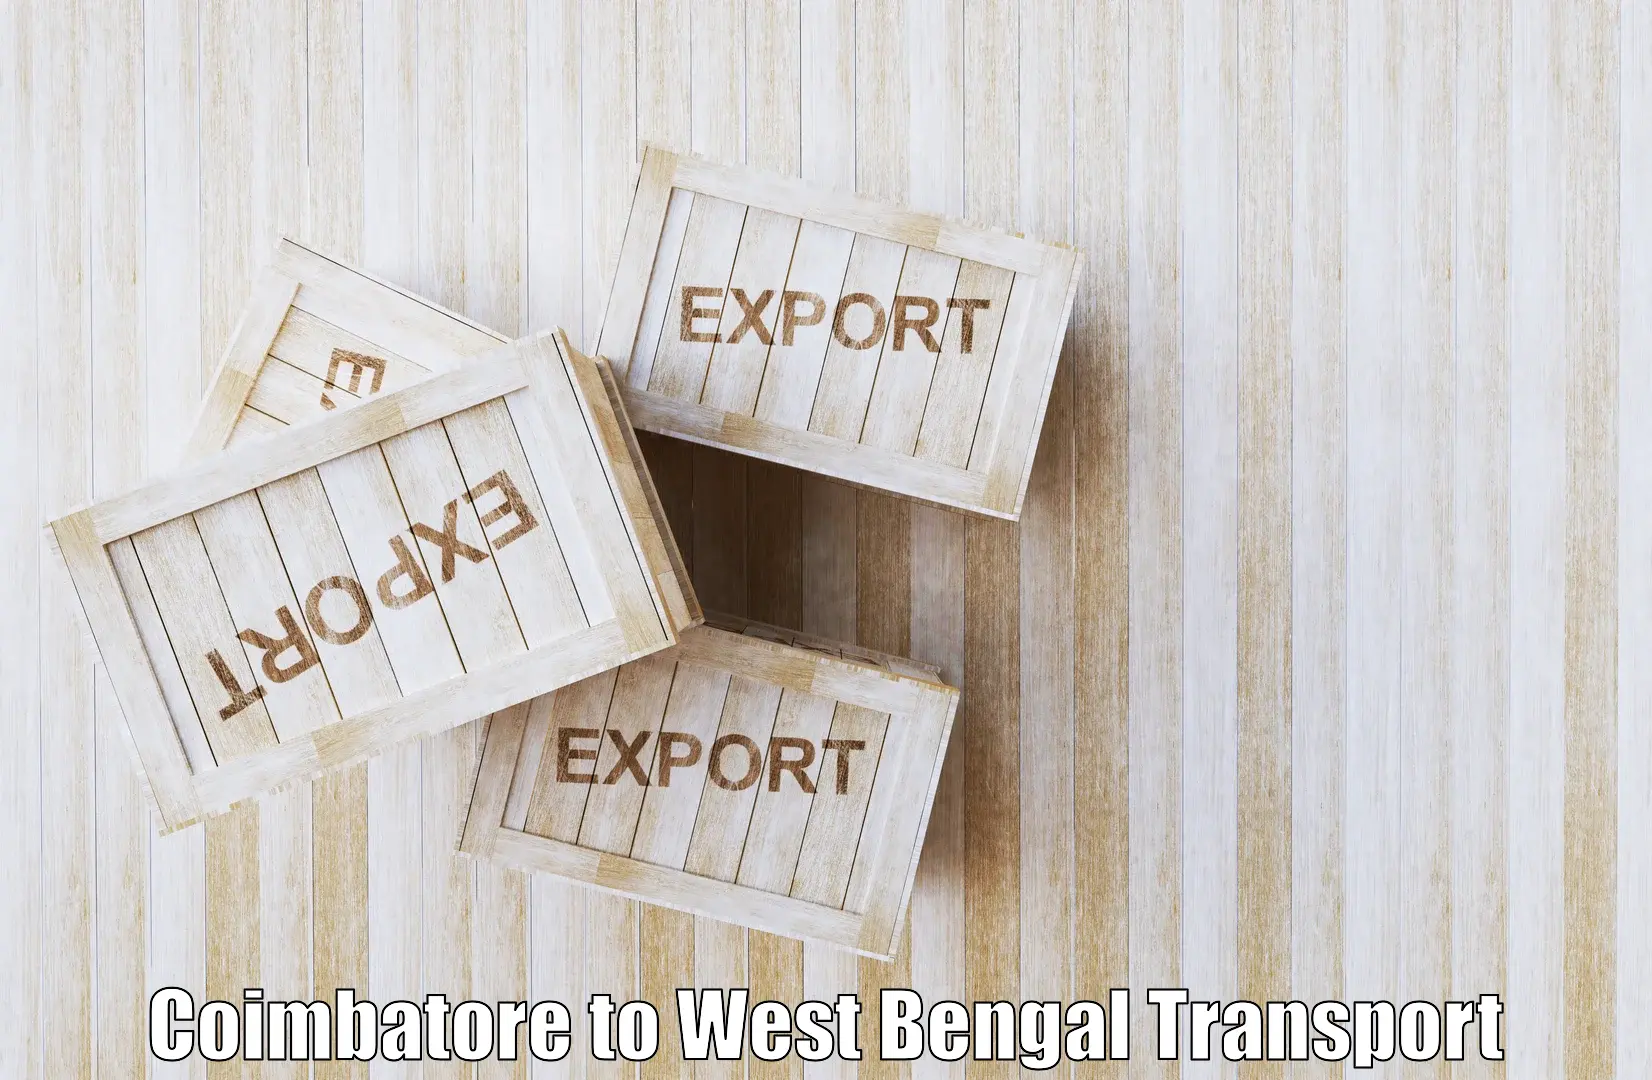 Two wheeler parcel service Coimbatore to Ennore